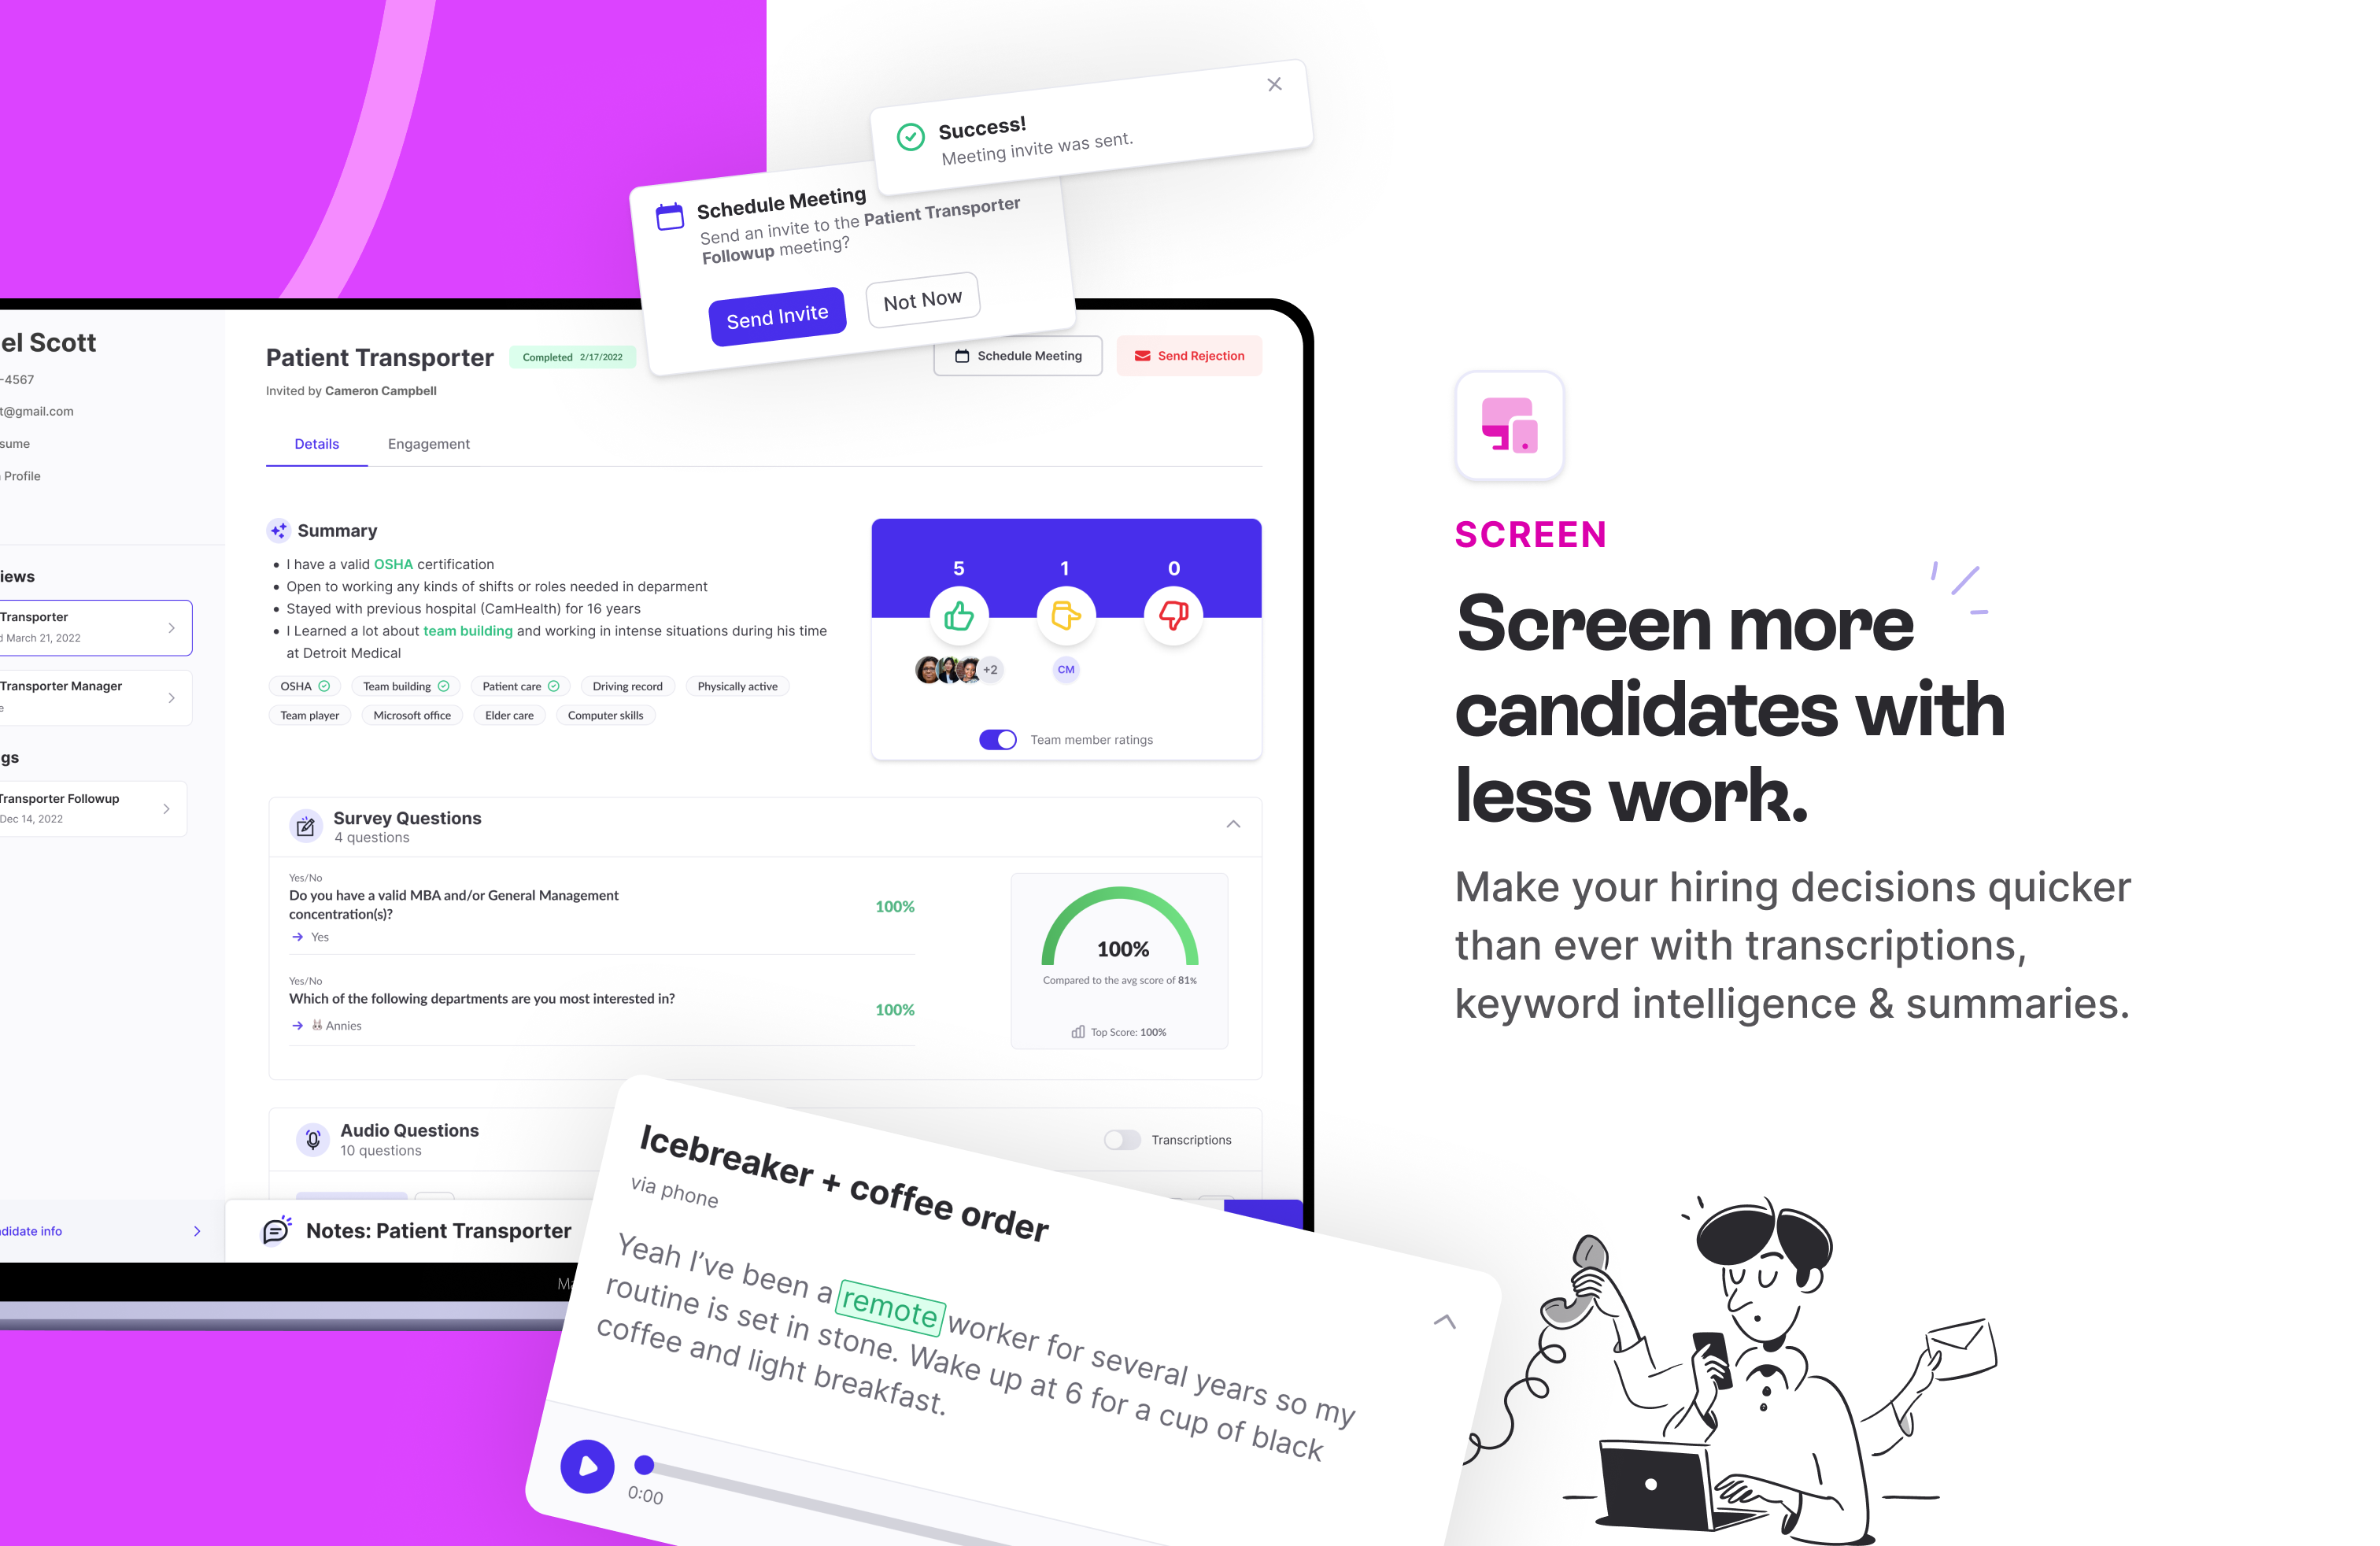 Screen more candidates with less work.